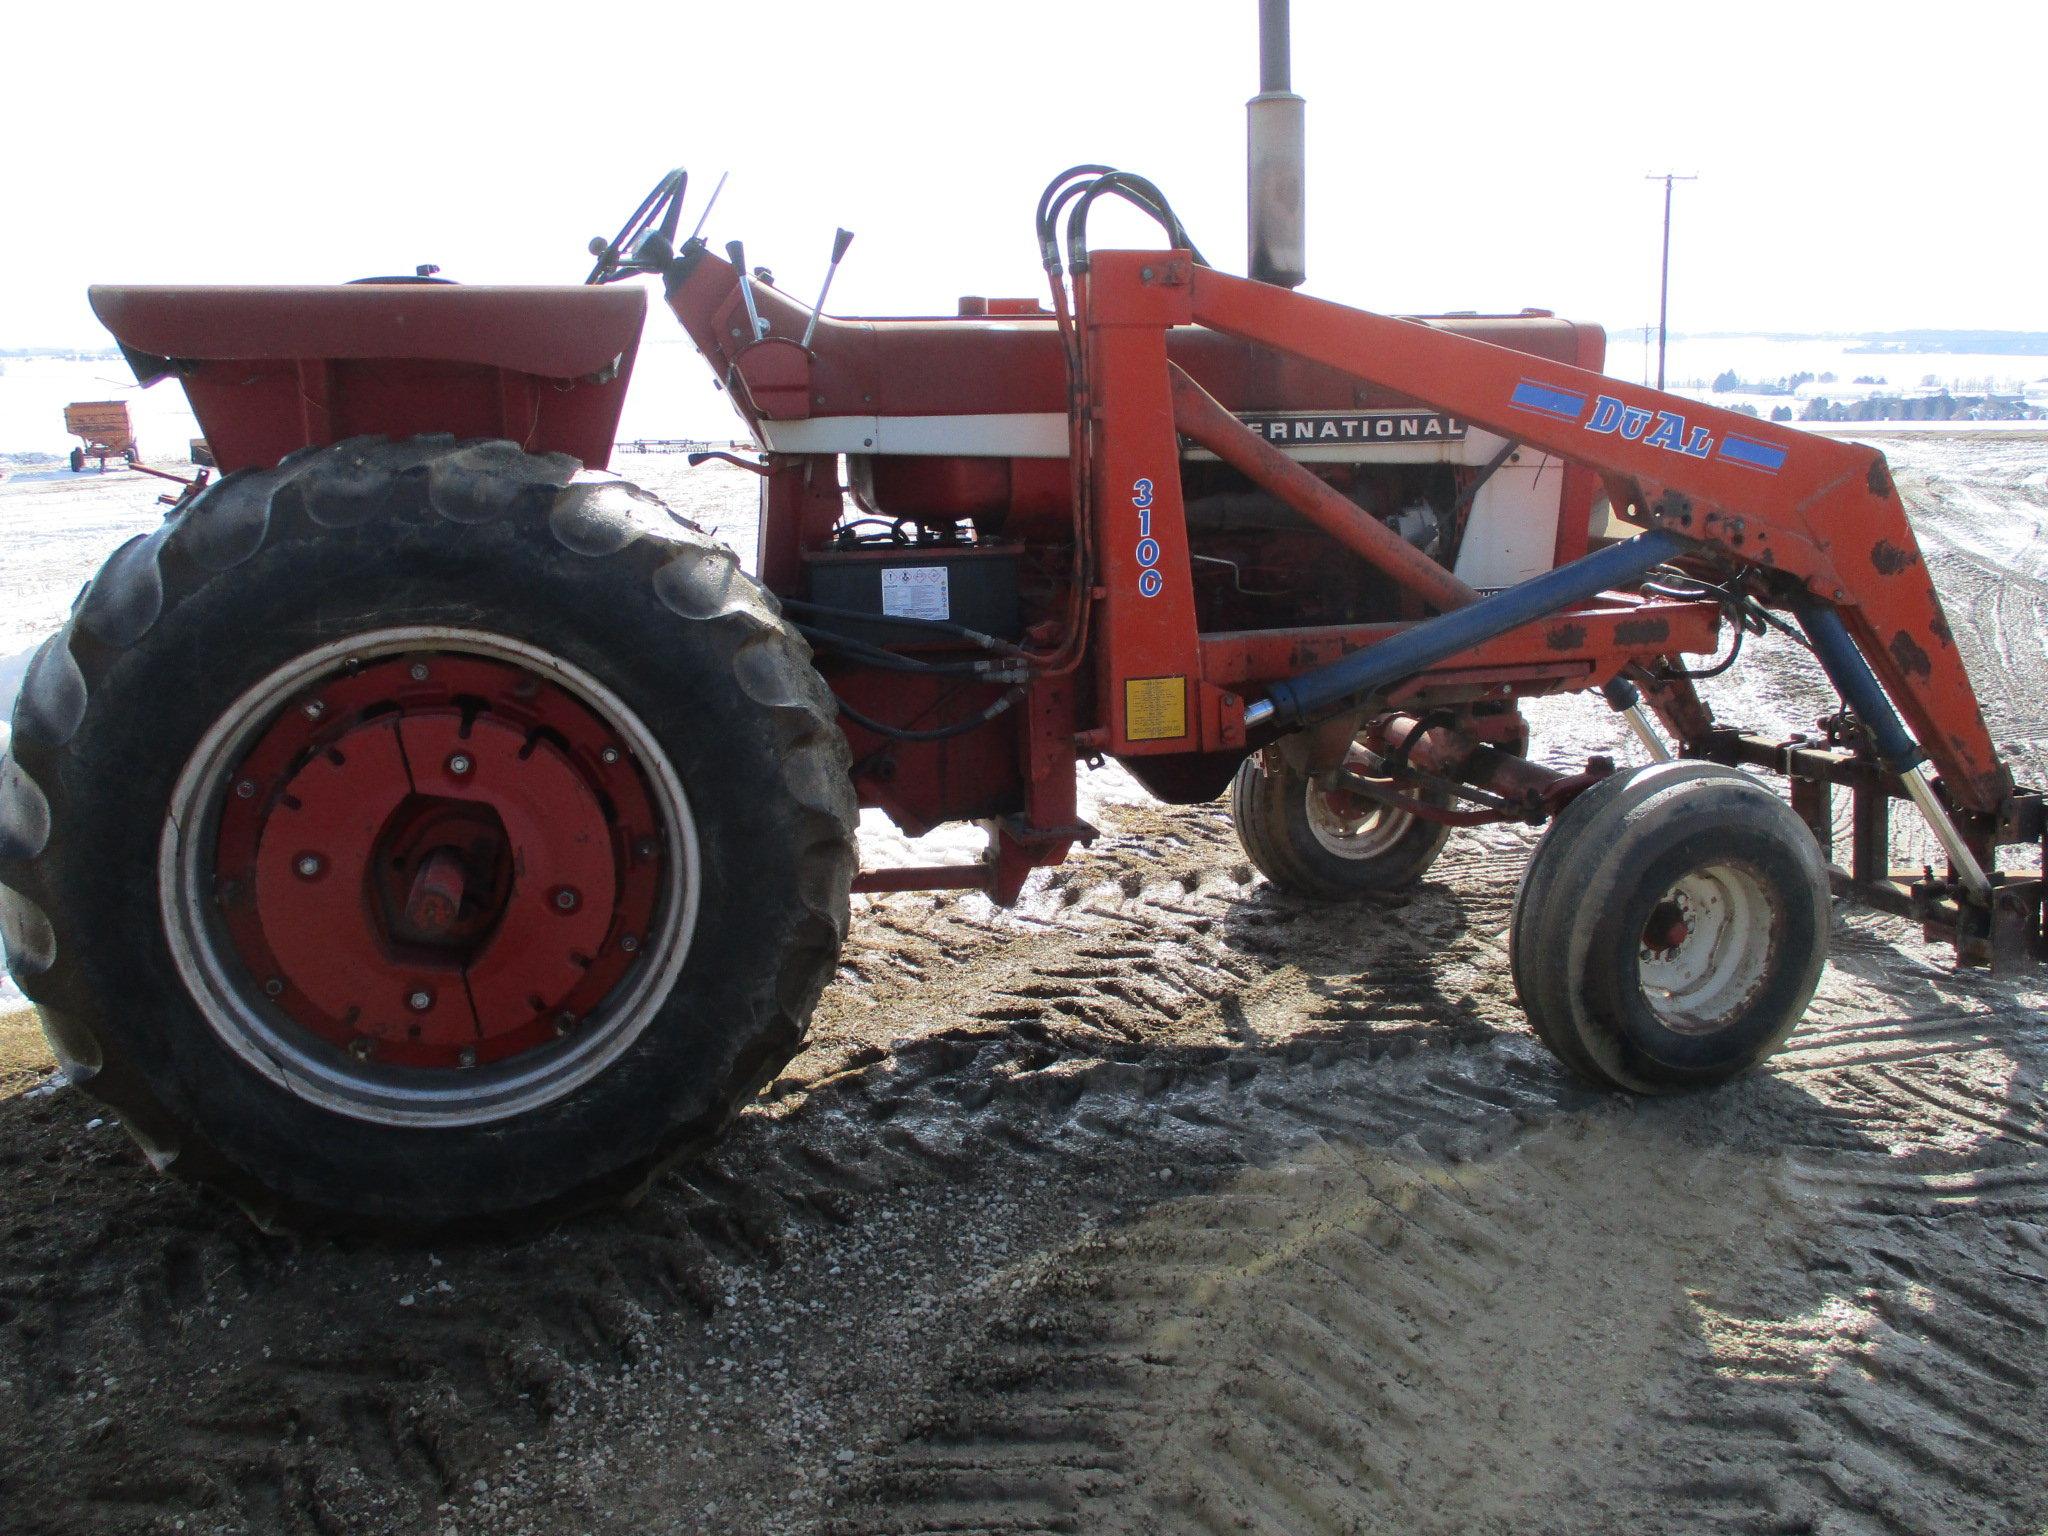 Int. 856 Custom dsl. 6,301 hrs. shwoing, 3pt. dual PTO, hyd W/Dual 3100 hyd loader, pallet forks